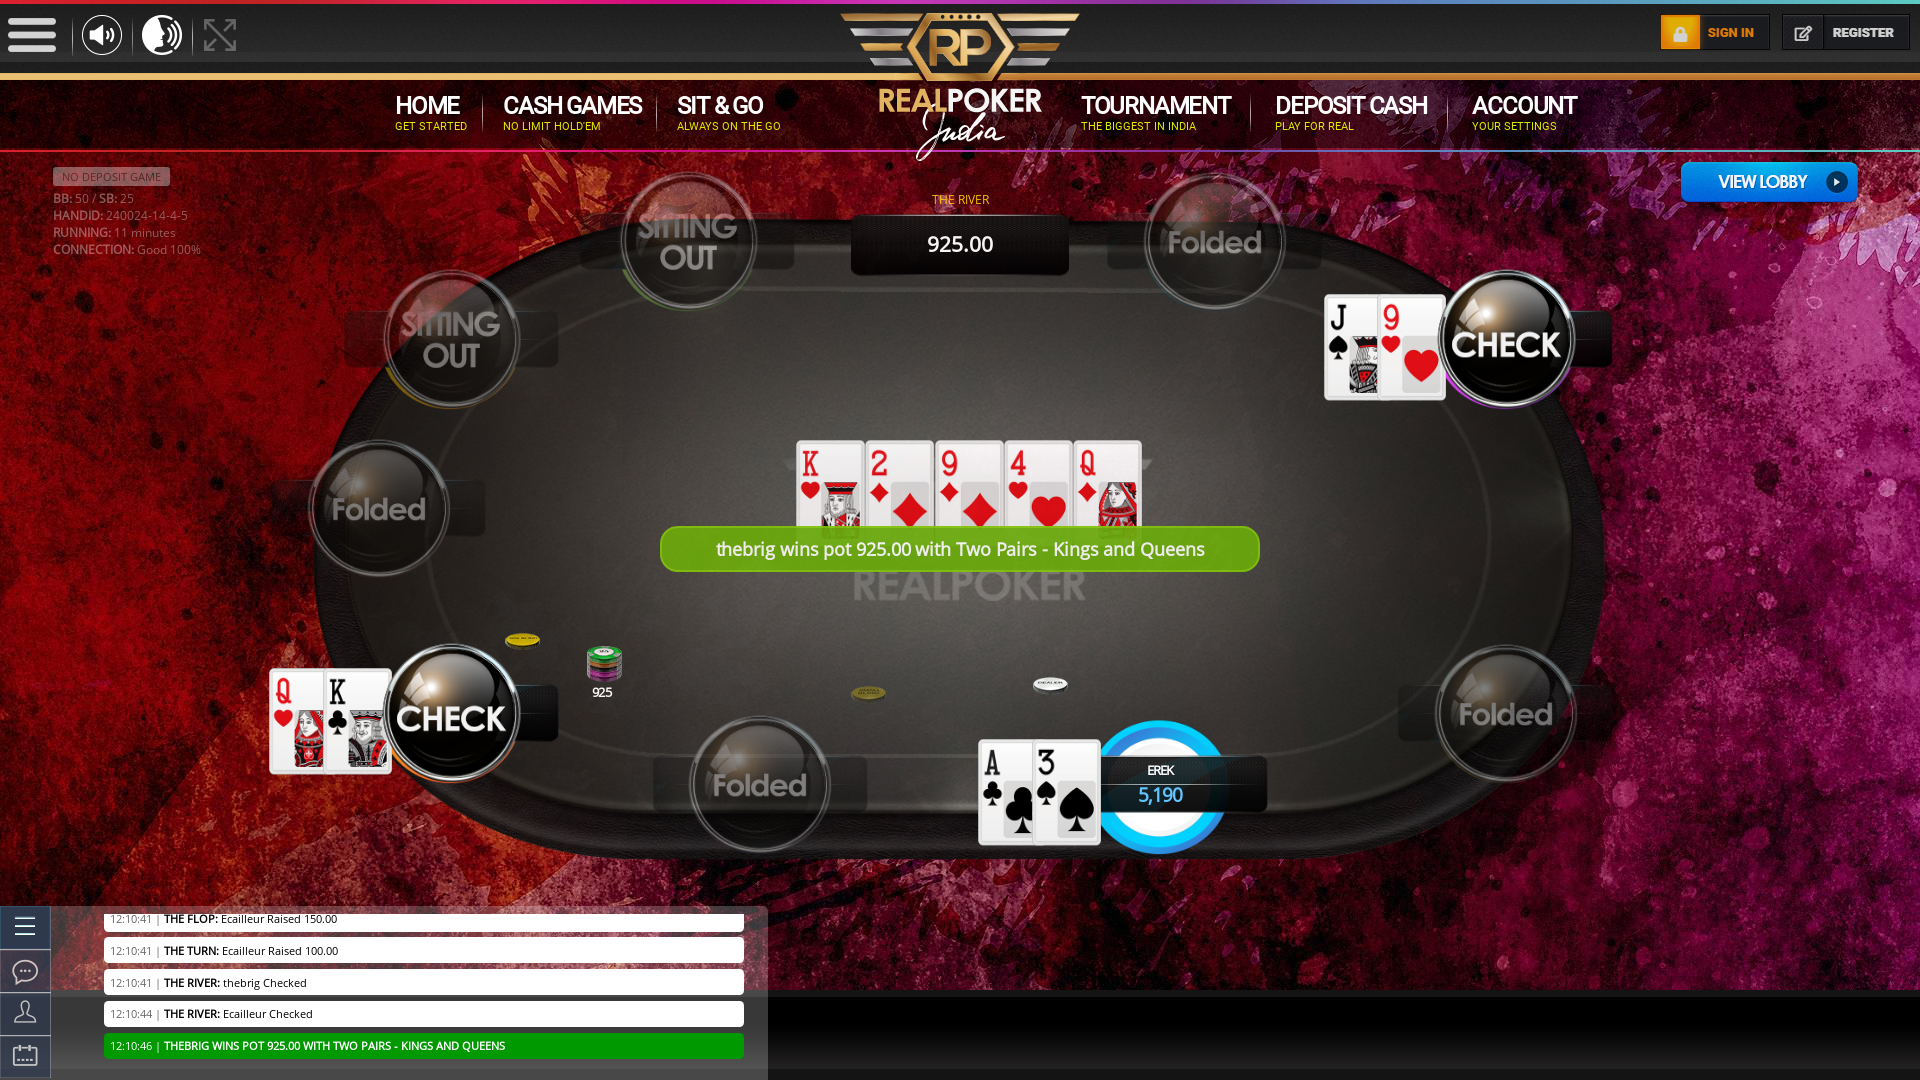 Indian 10 player poker in the 11th minute